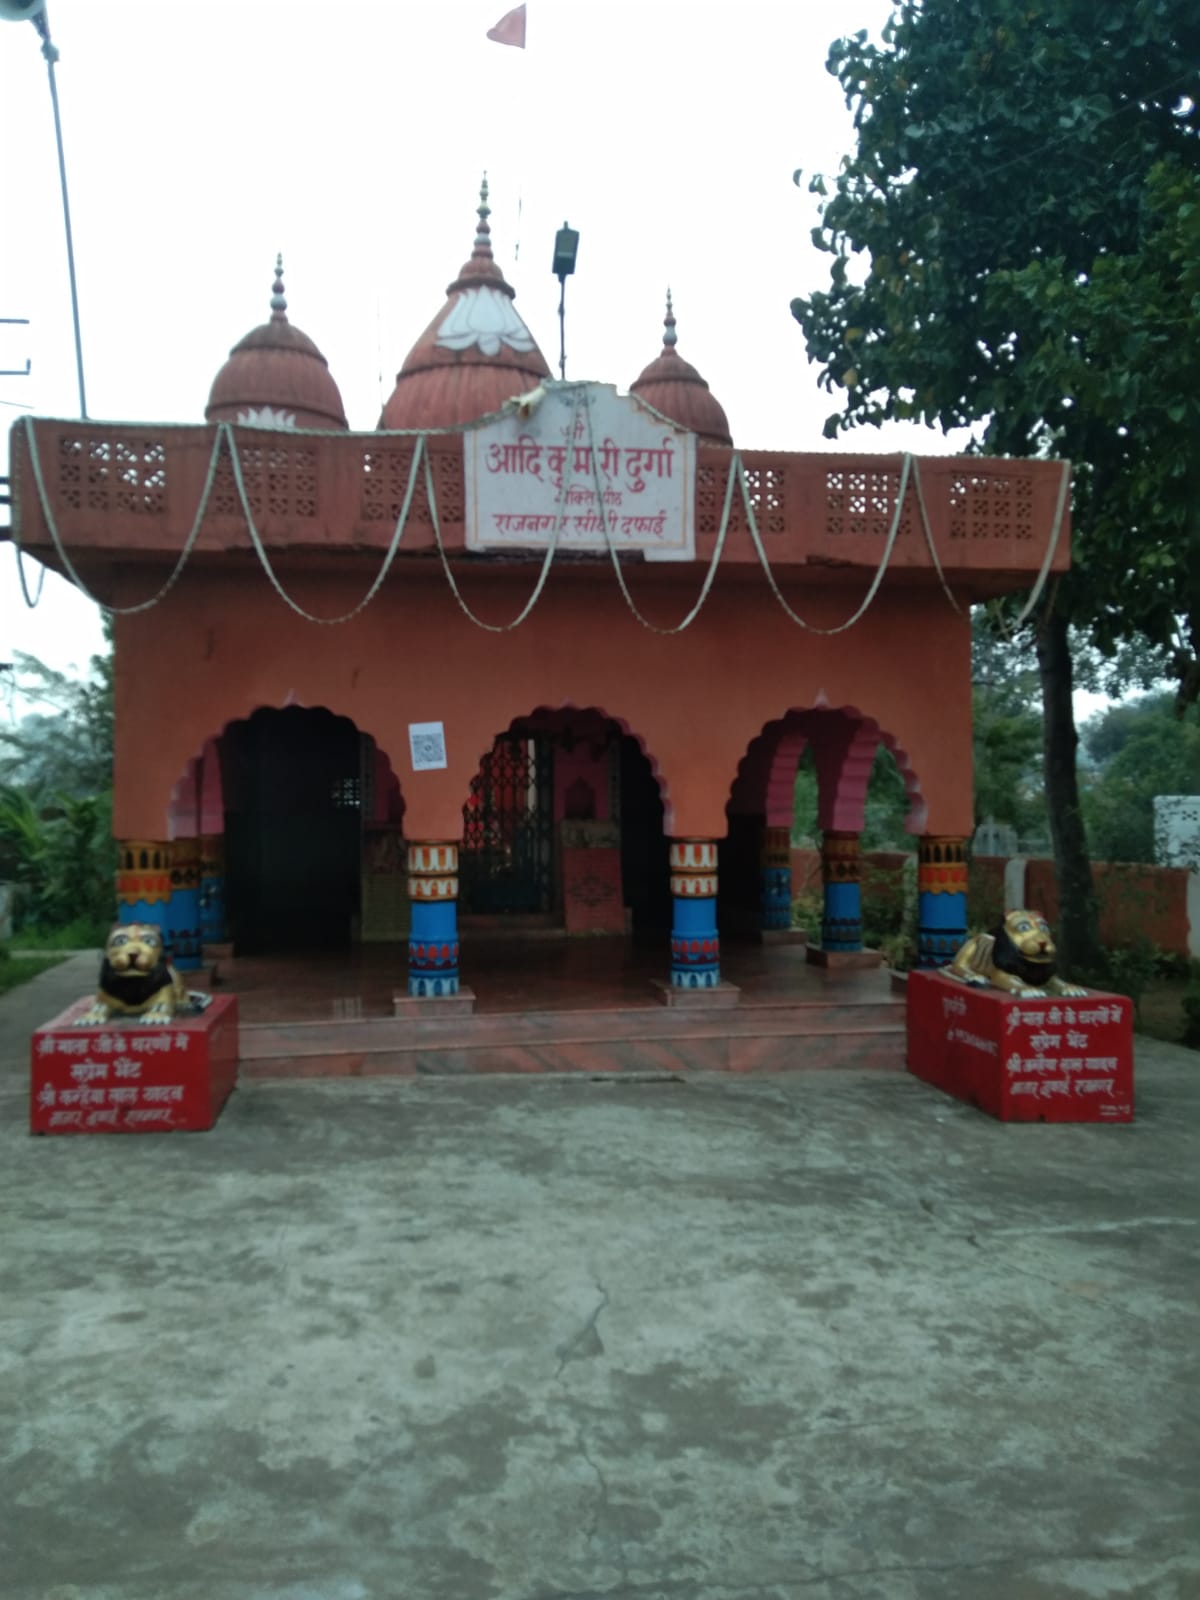 The donation box of the Gurudwara and the theft of the crown of Durga